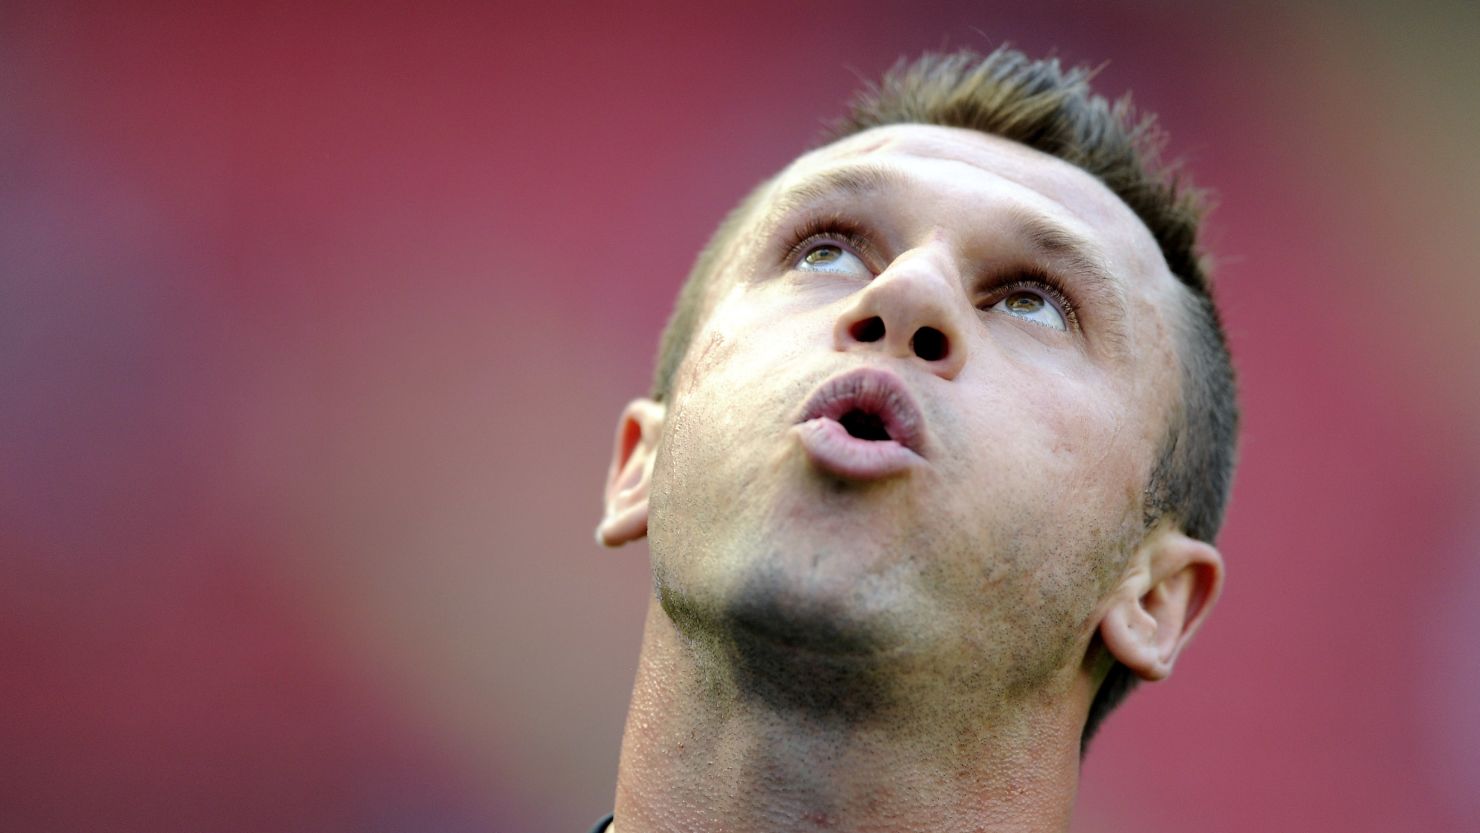 Antonio Cassano scored again for Inter Milan with the opening goal in the San Siro in a 2-0 win over Catania.